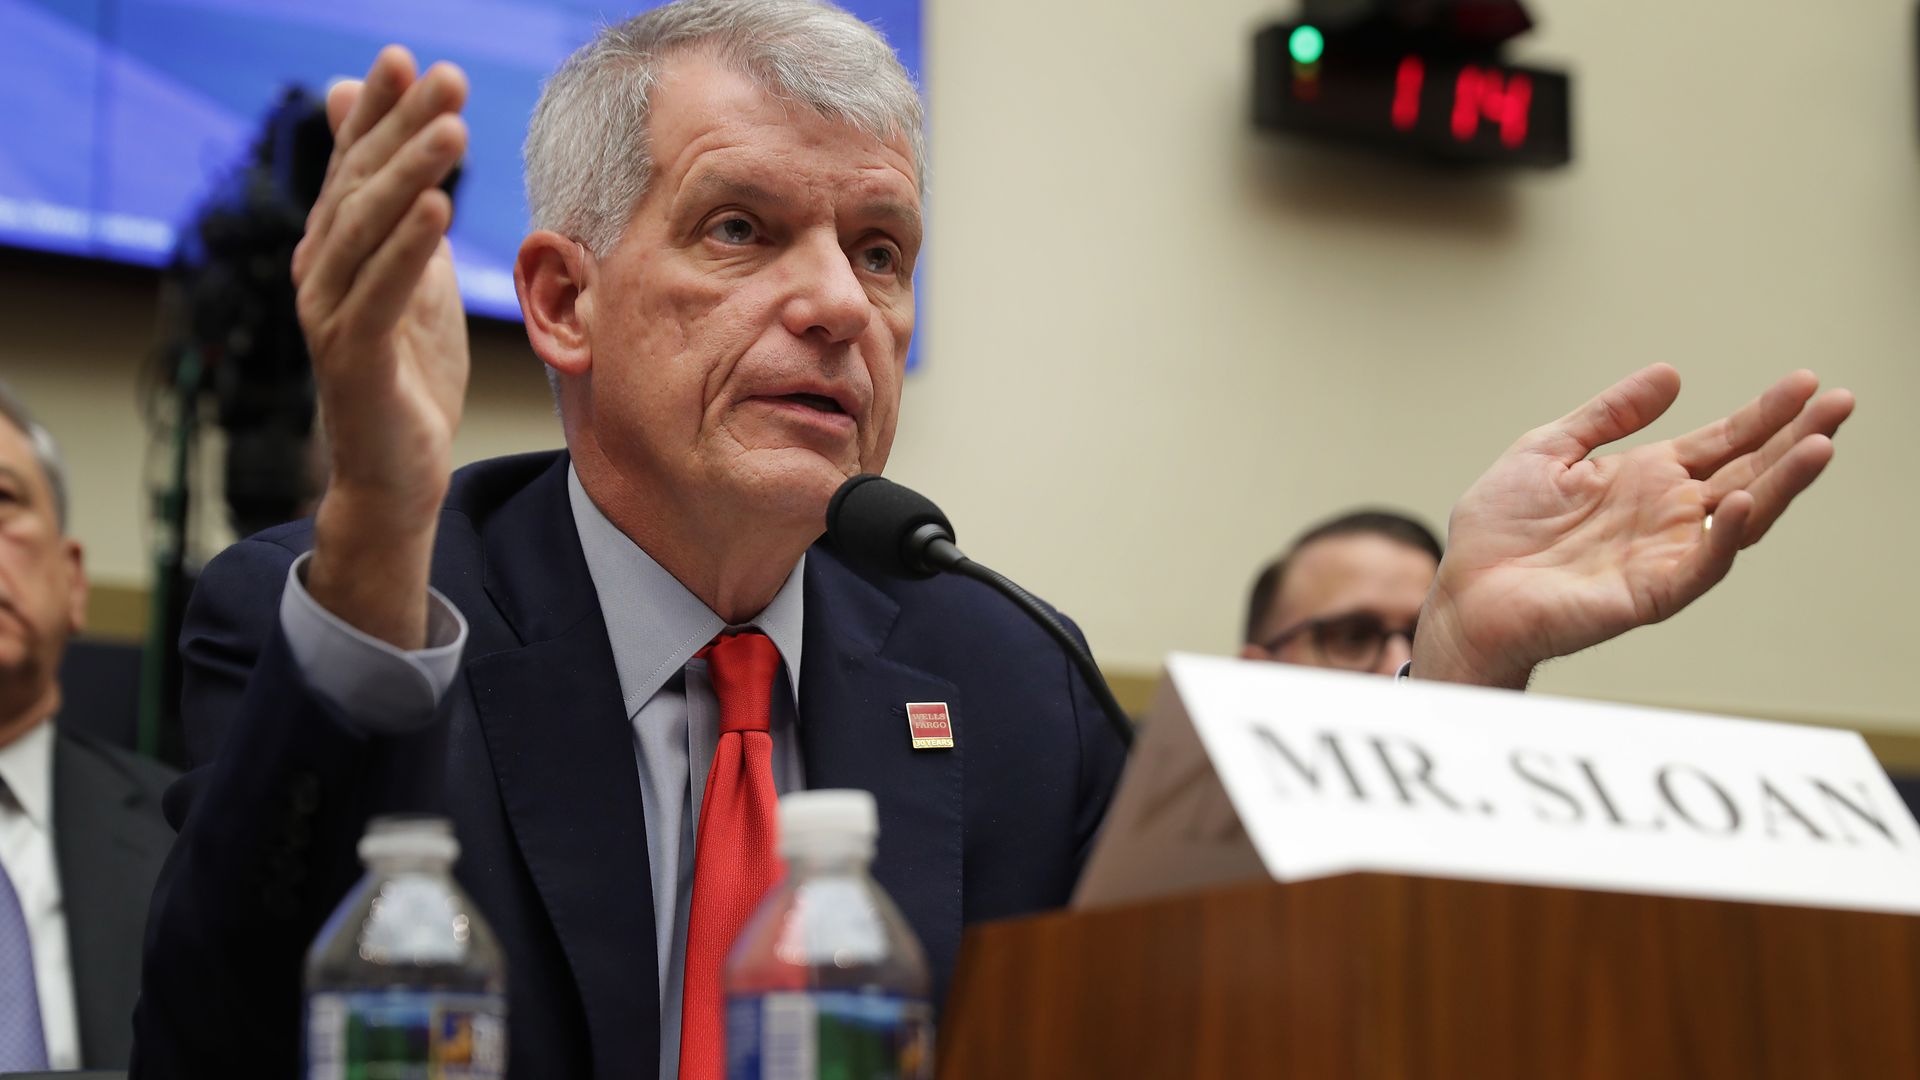 Wells Fargo and Company CEO Timothy Sloan testifies before the House Financial Services Committee